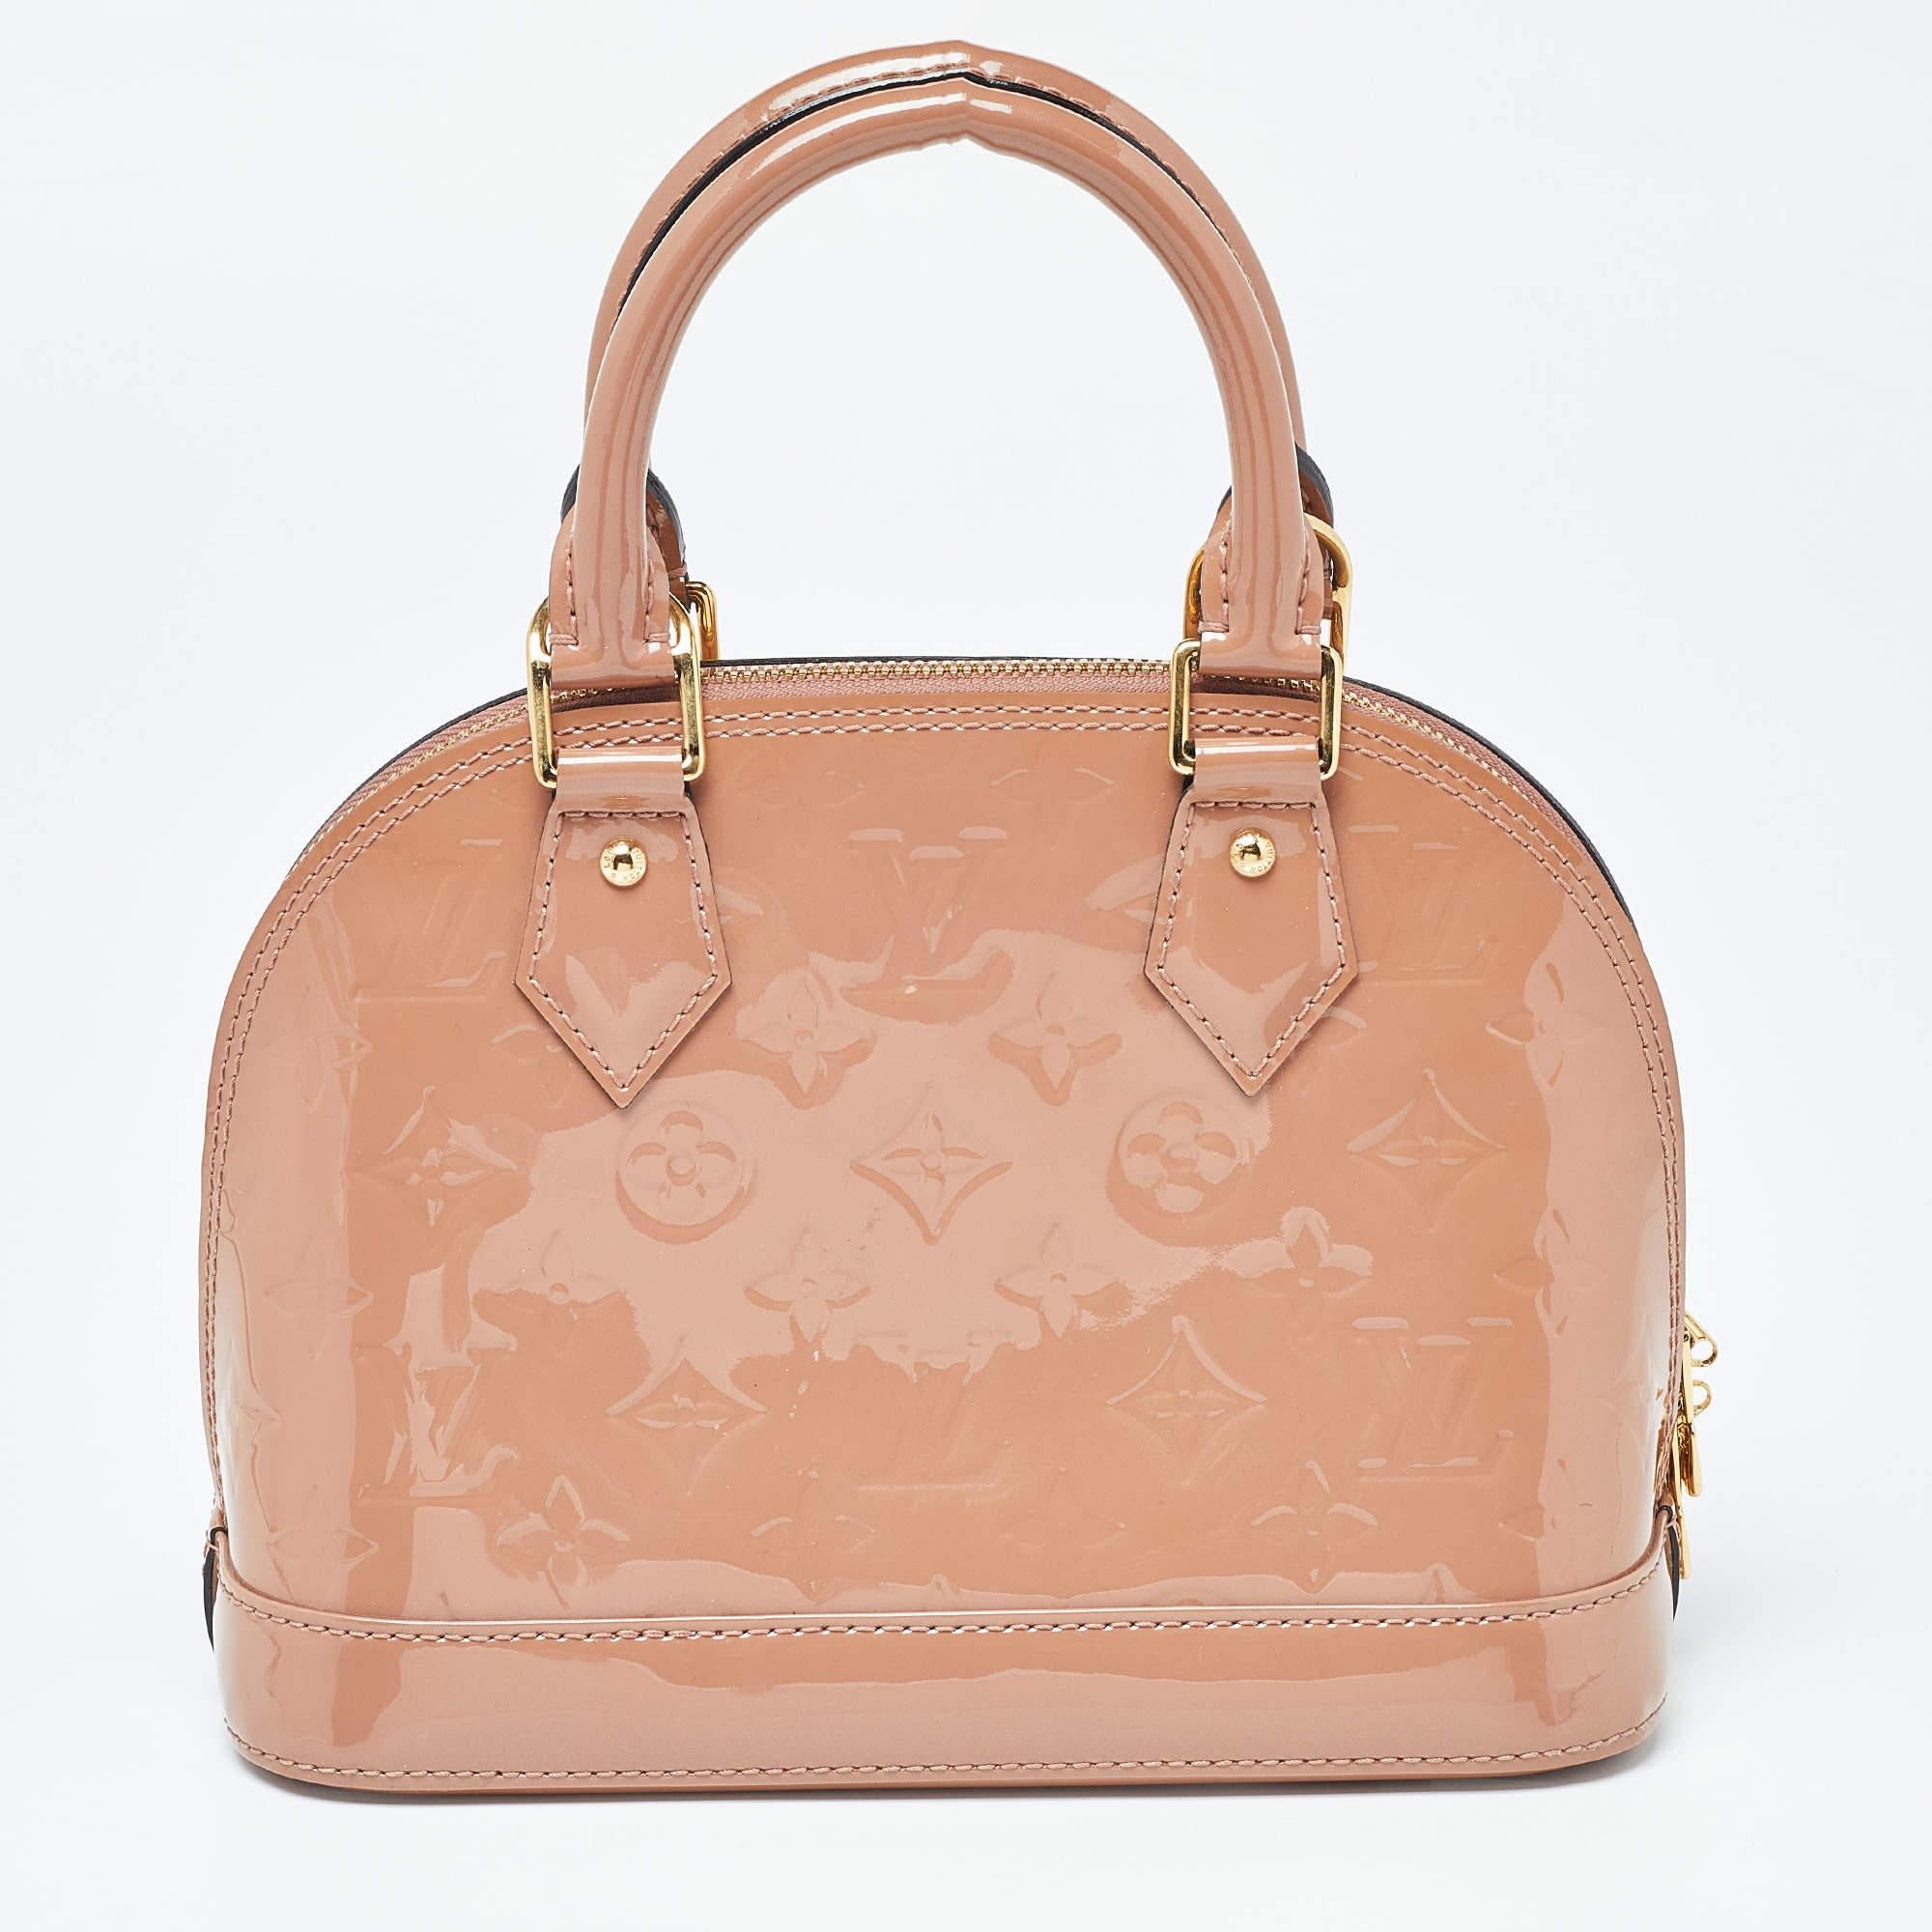 The Louis Vuitton Alma BB comes crafted from Monogram Vernis, featuring double zippers with a fabric interior. Two handles and a strap are provided for you to parade it elegantly. Make this Alma yours today!

Includes: Original Dustbag, Detachable